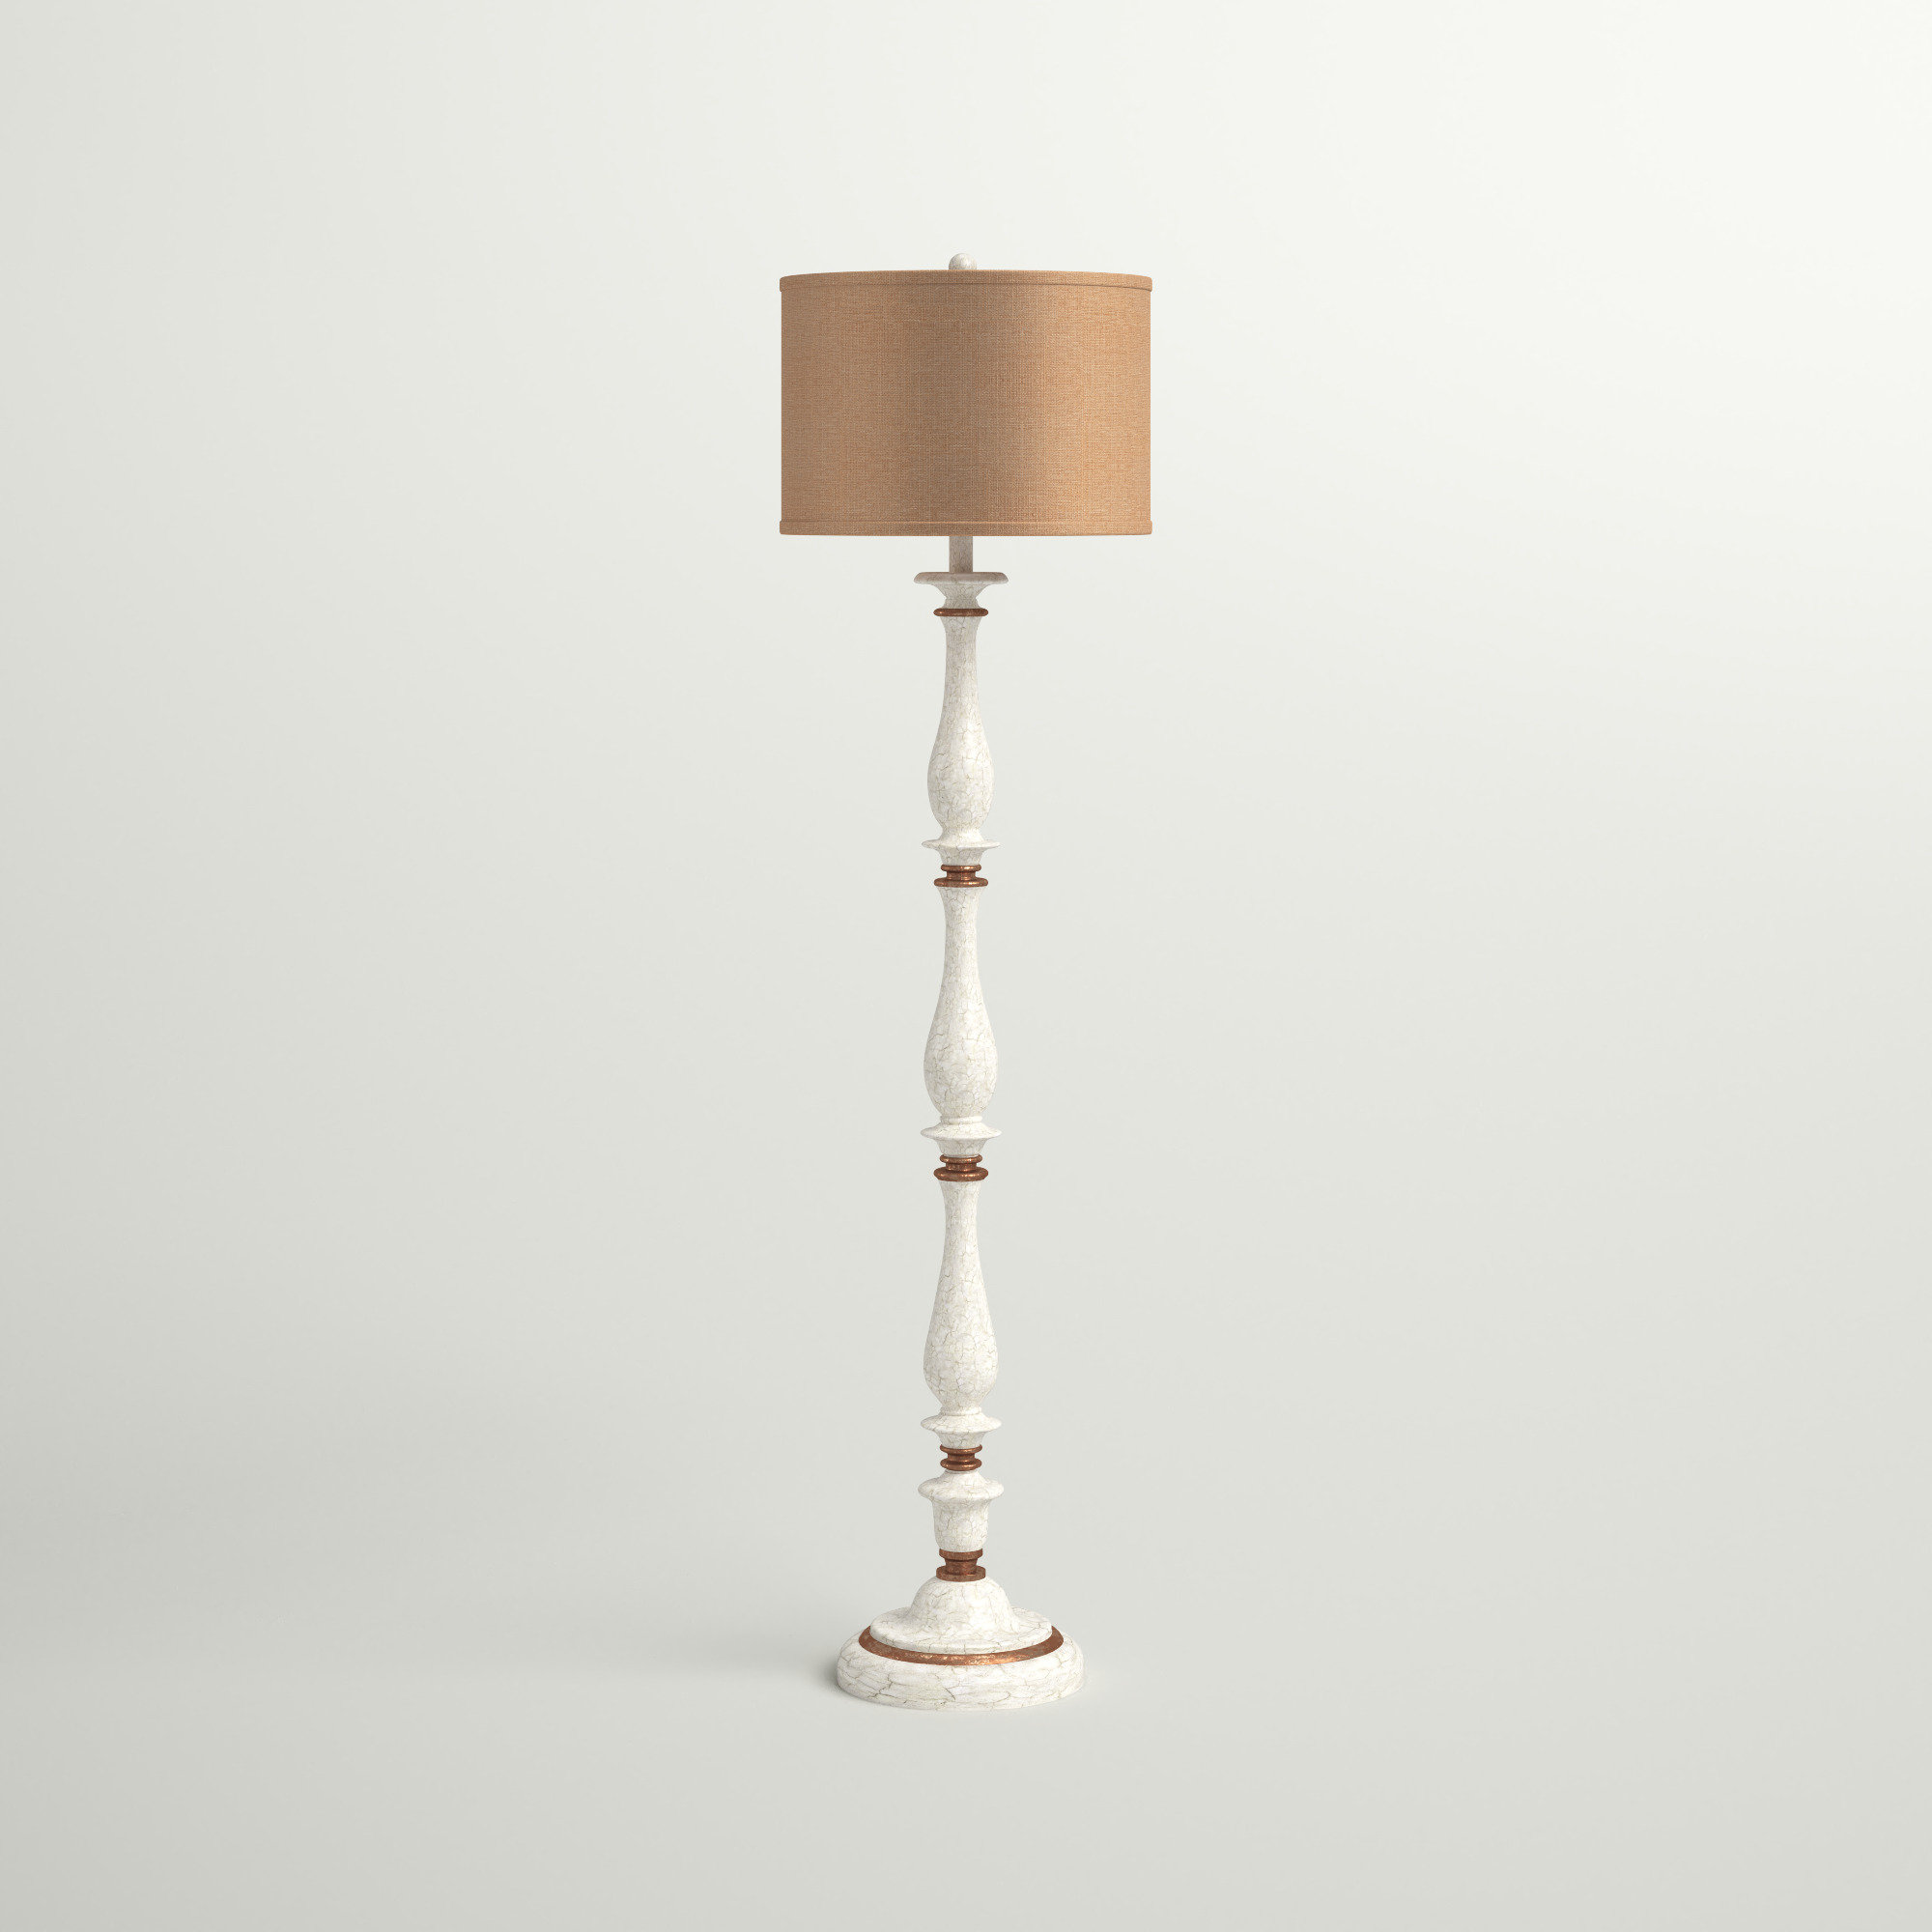 Only for Designated Buyer Torchiere Lamp Shade Frosted White Glass Large 18 in for sale online 